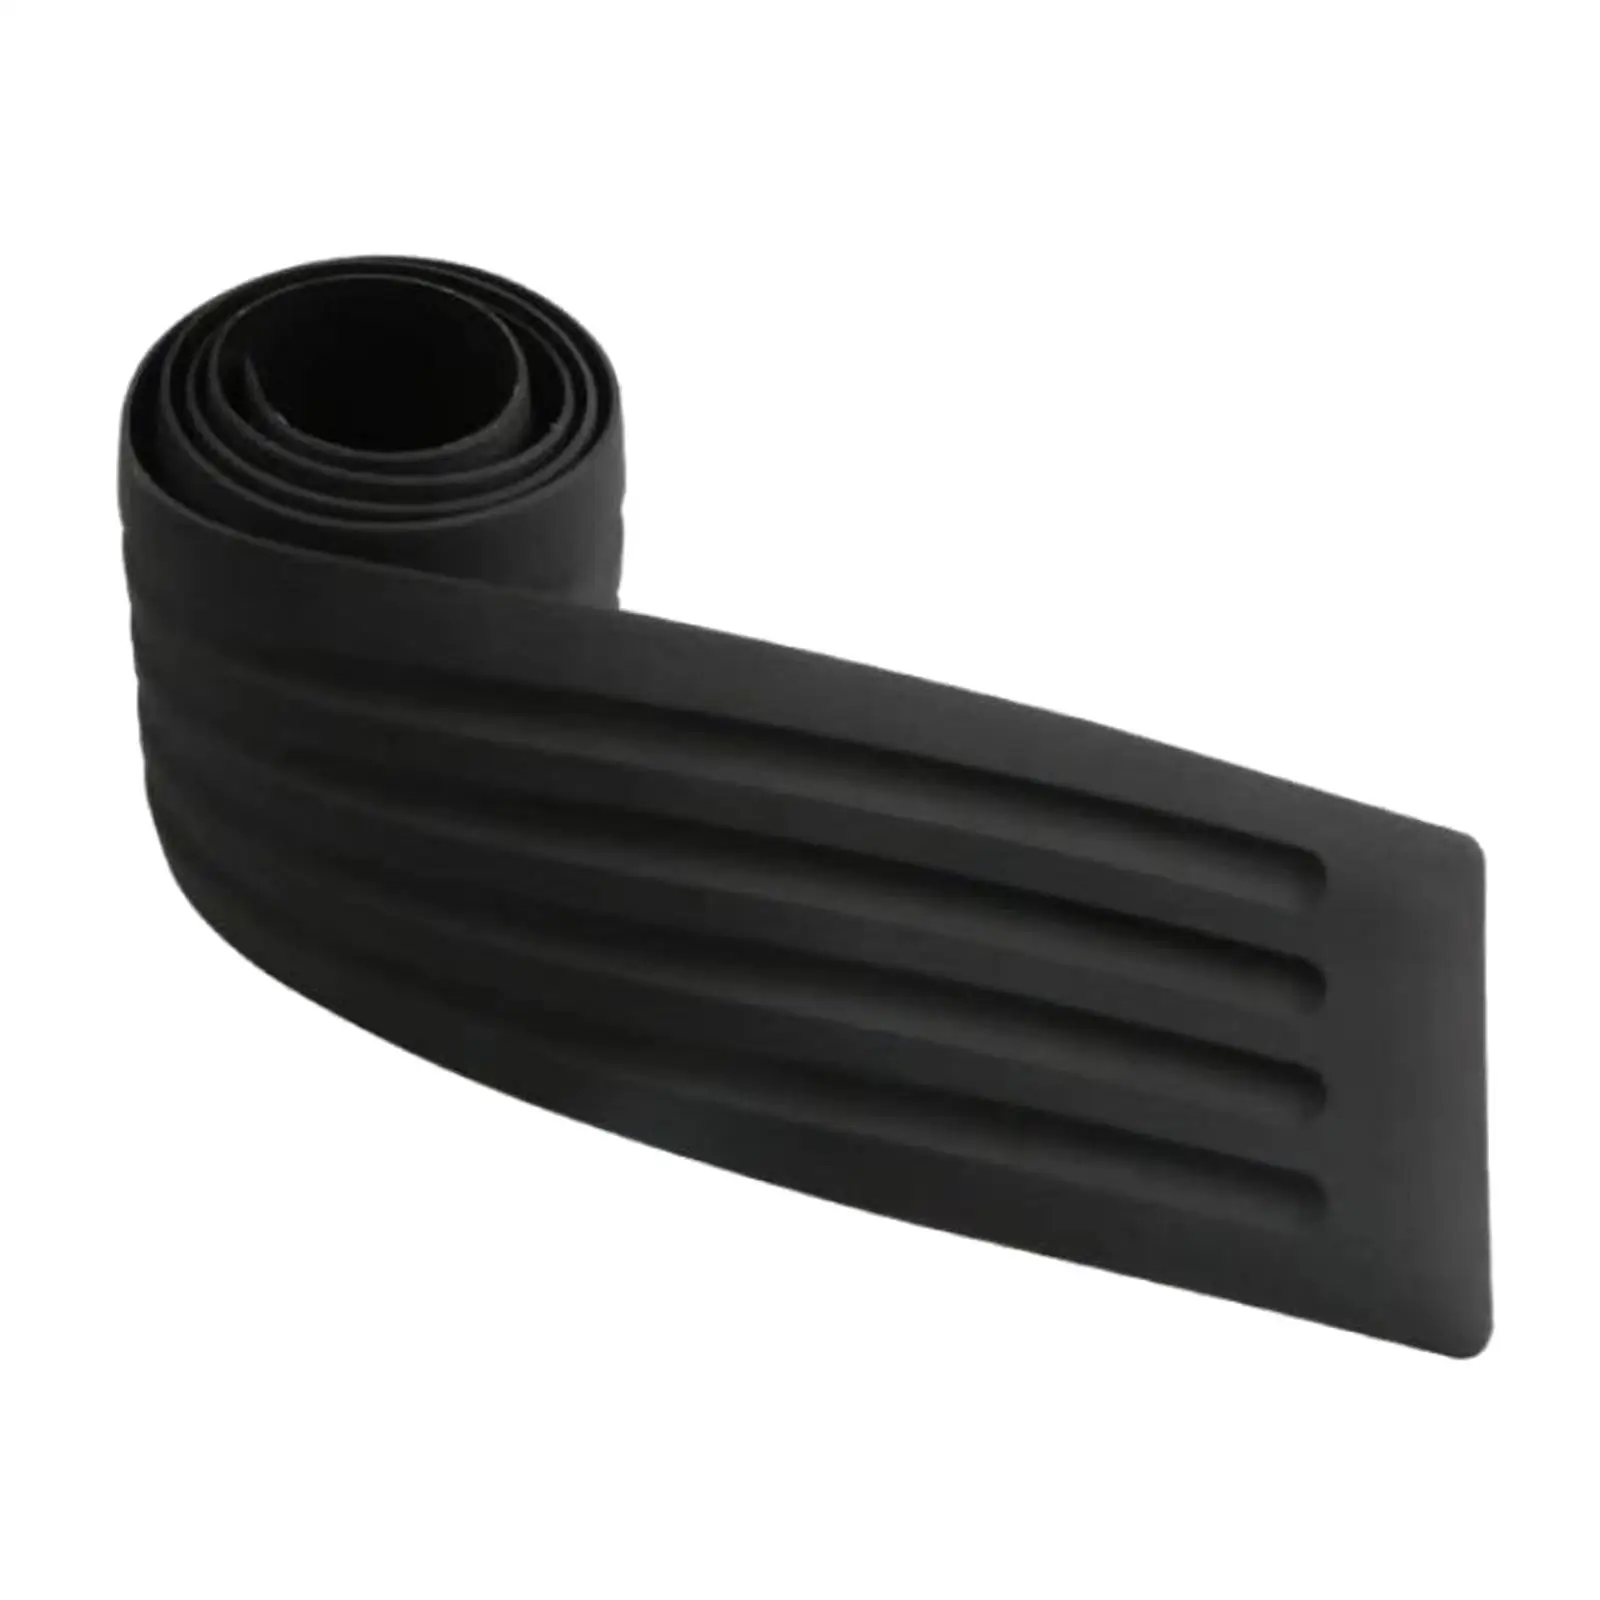 Rear Bumper Protector Guard Rubber Universal Protection for Car Easy to Install